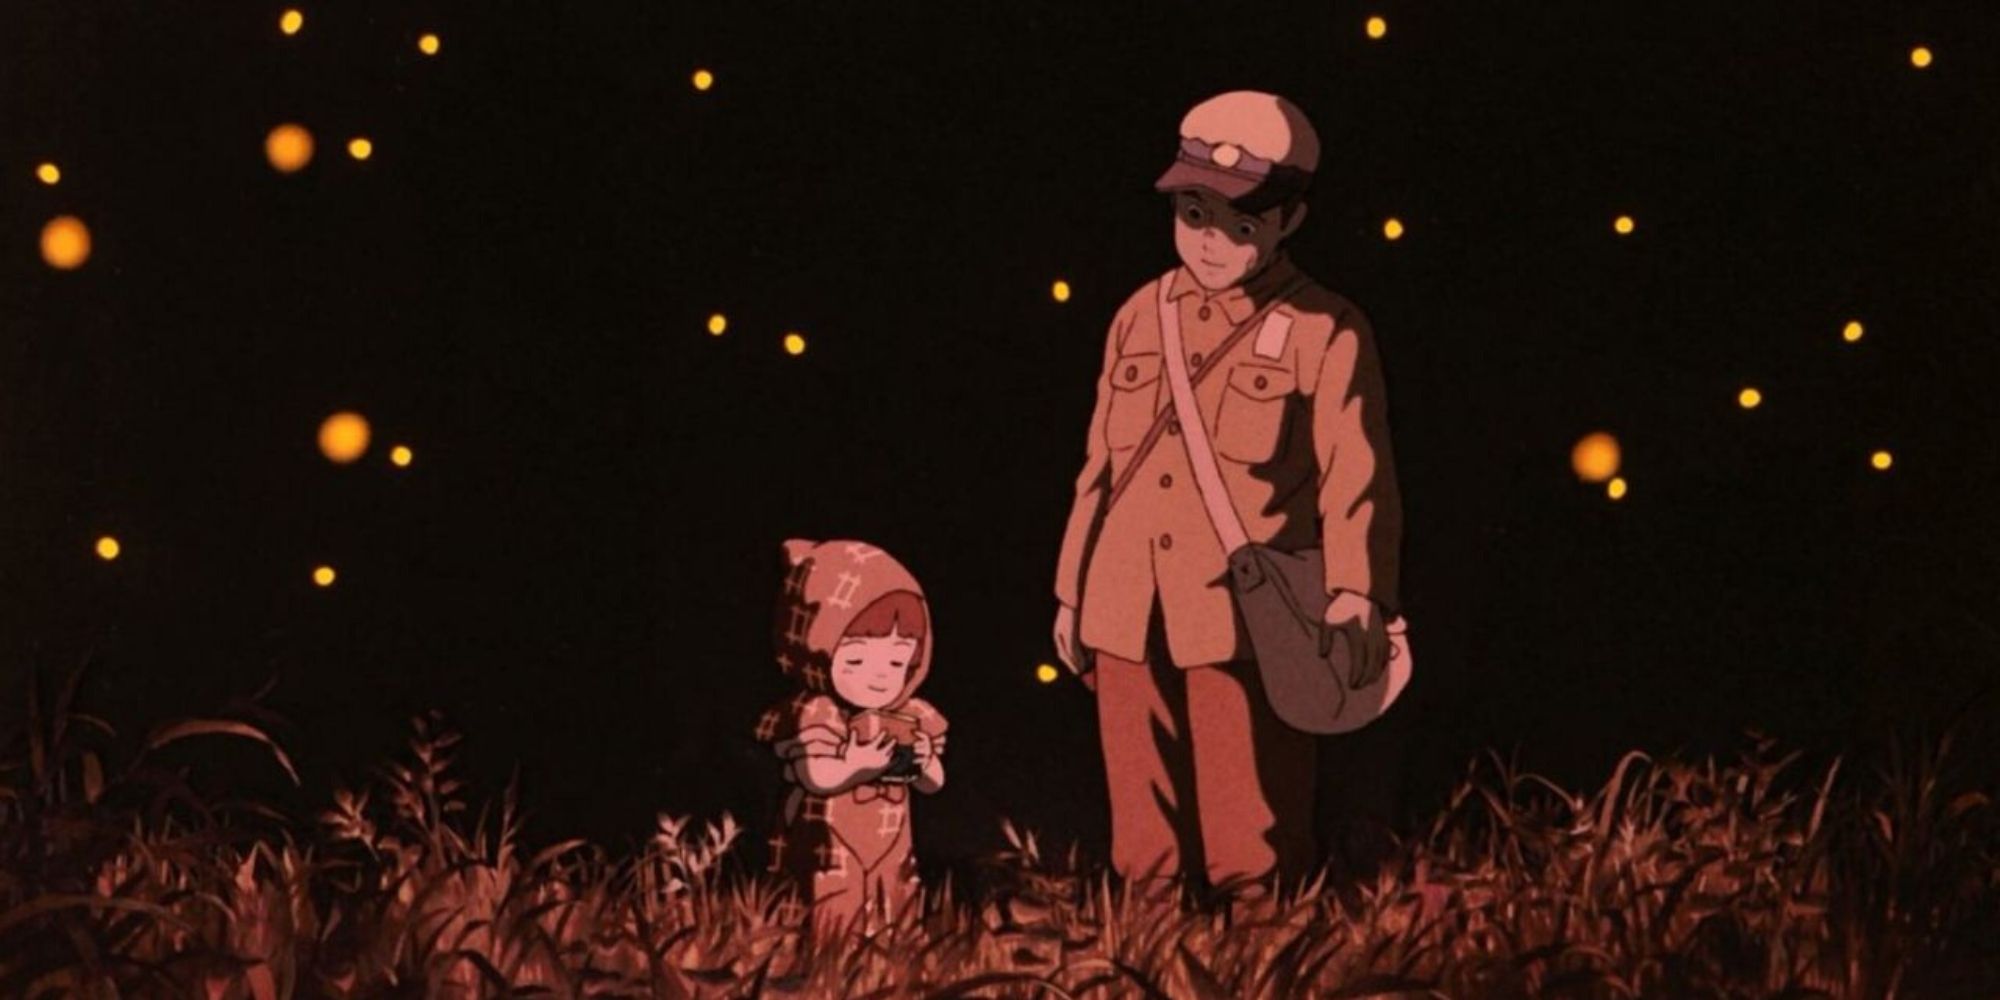 Key & BPM for Grave of the Fireflies Theme (From 'Grave of the Fireflies')  by Anime Kei | Tunebat